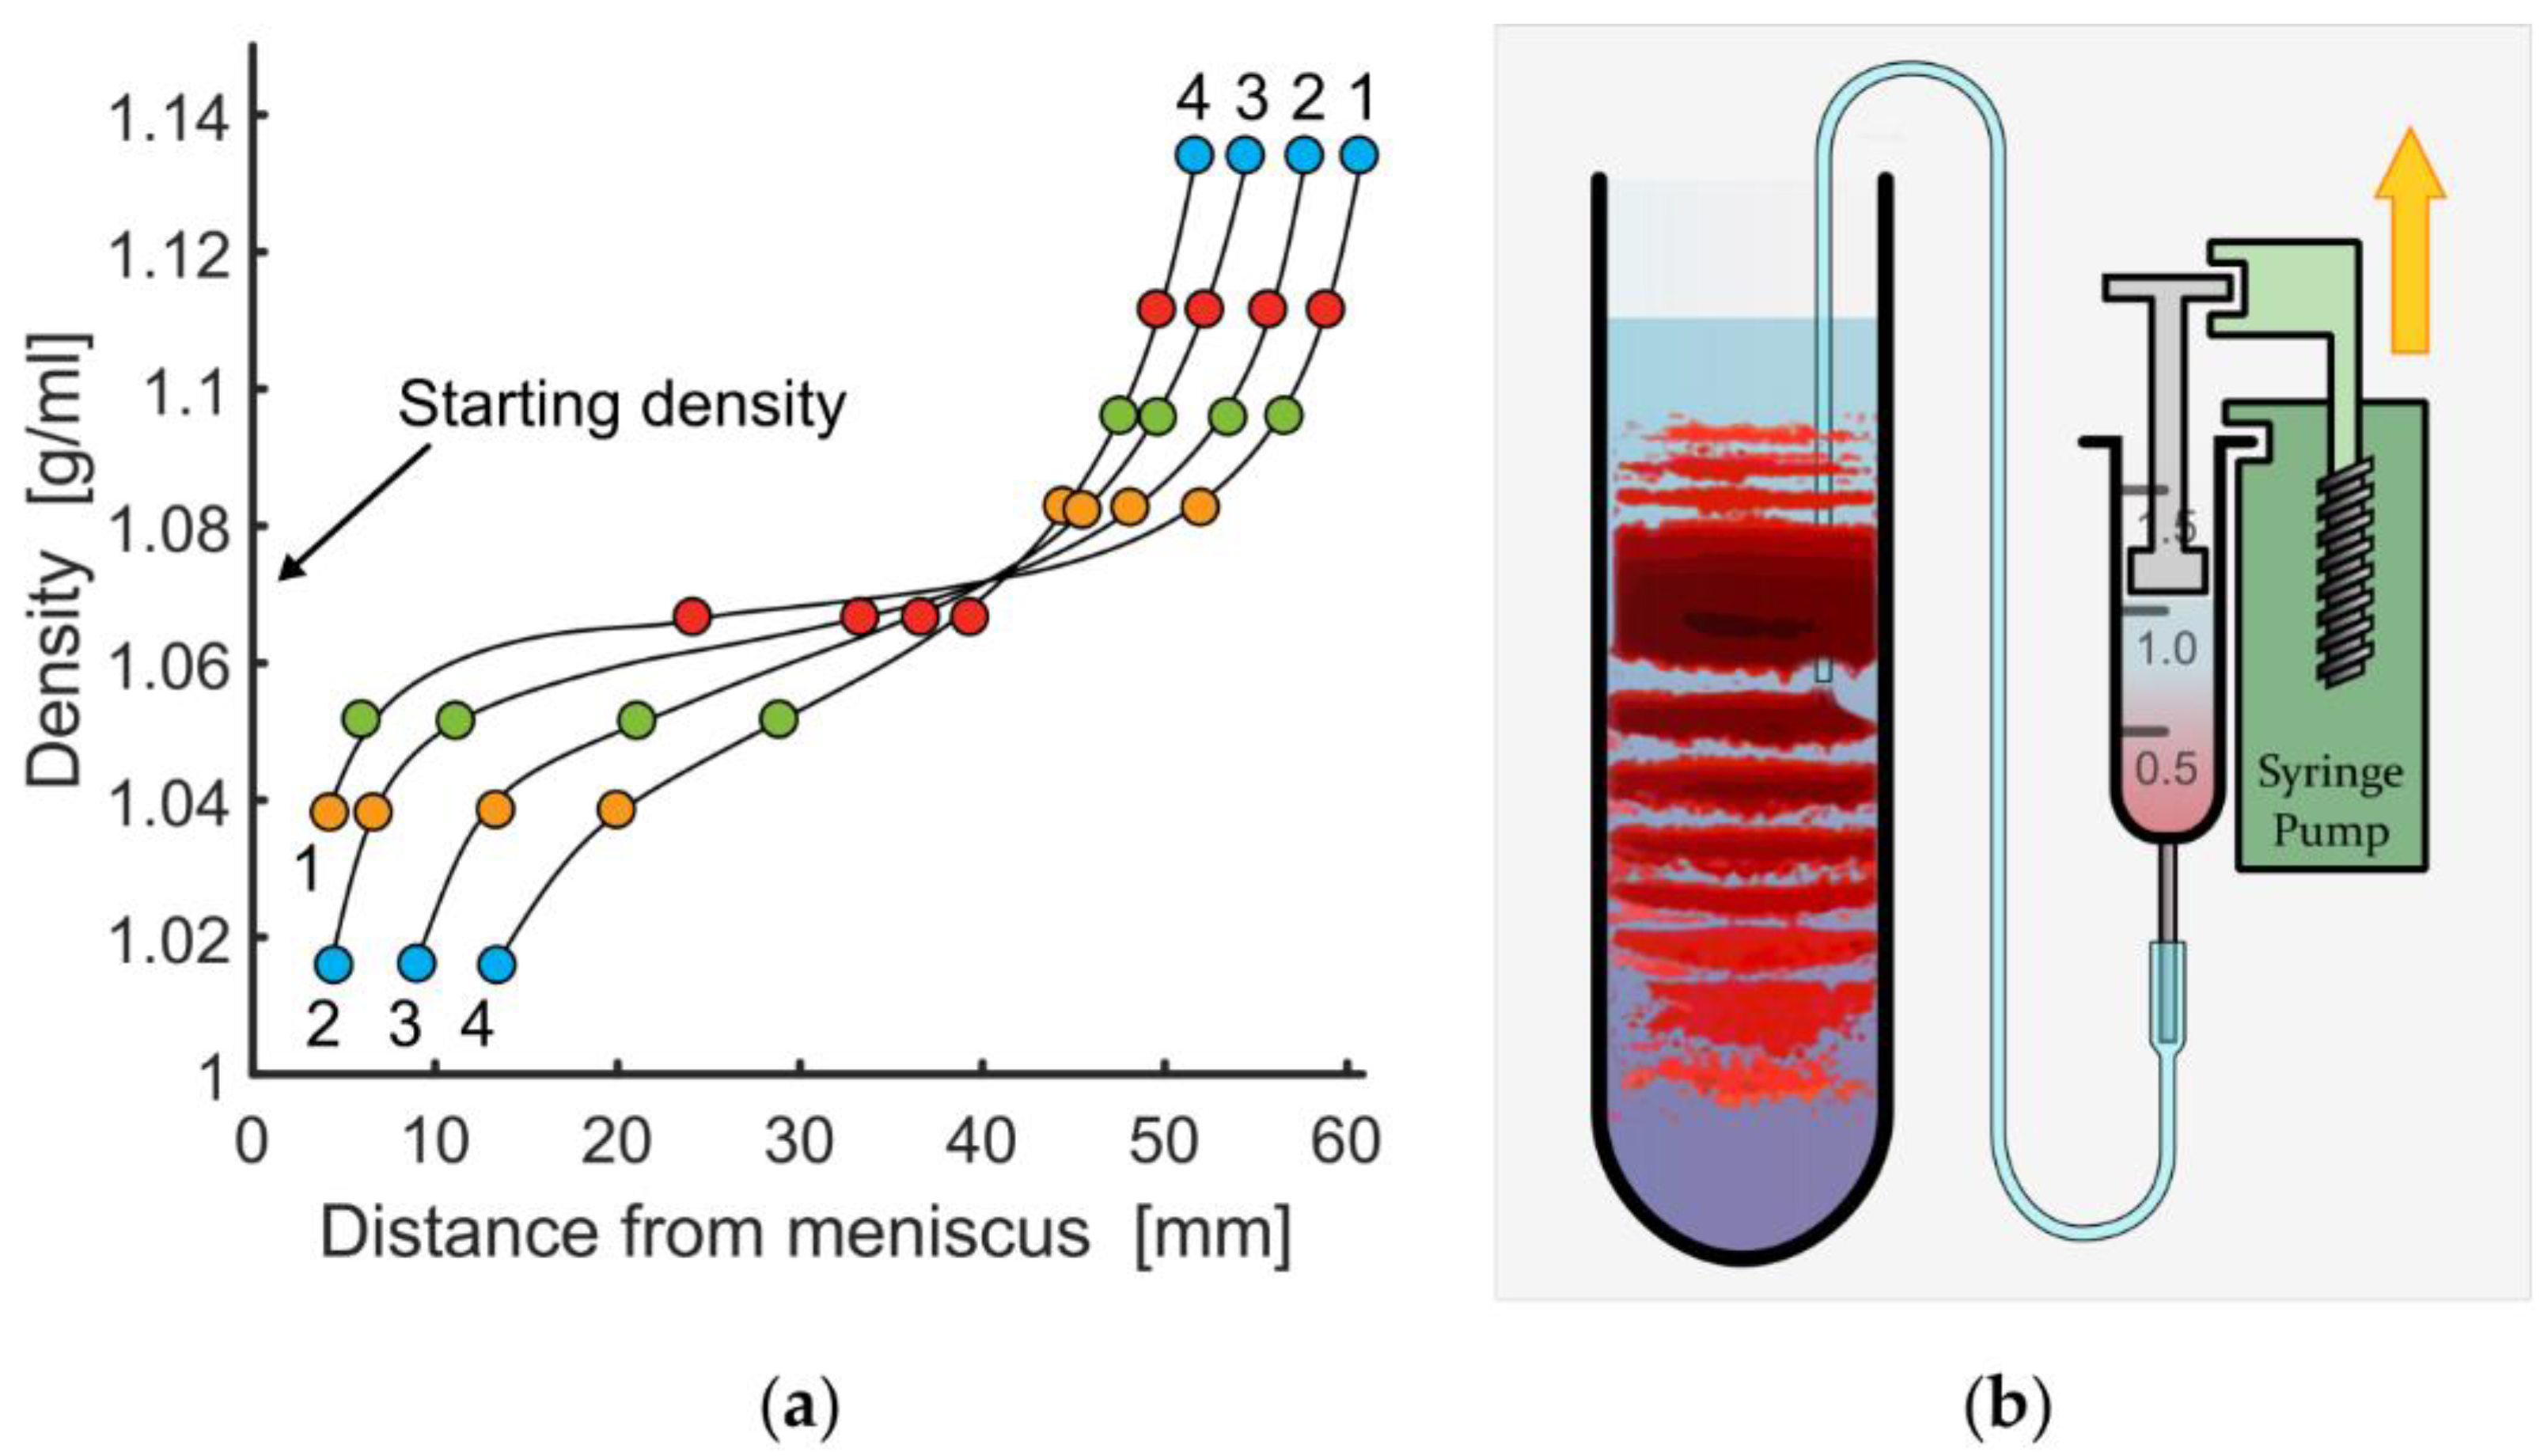 (a) Density gradient measurements of Percoll medium by GE Healthcare using colored beads in an angle head rotor at 20,000× g and varying centrifugation duration, (1) 15 min, (2) 30 min, (3) 60 min, (4) 90 min. (b) scheme of the cell-extraction process of from a single band using micro medical tubing and a syringe pump.